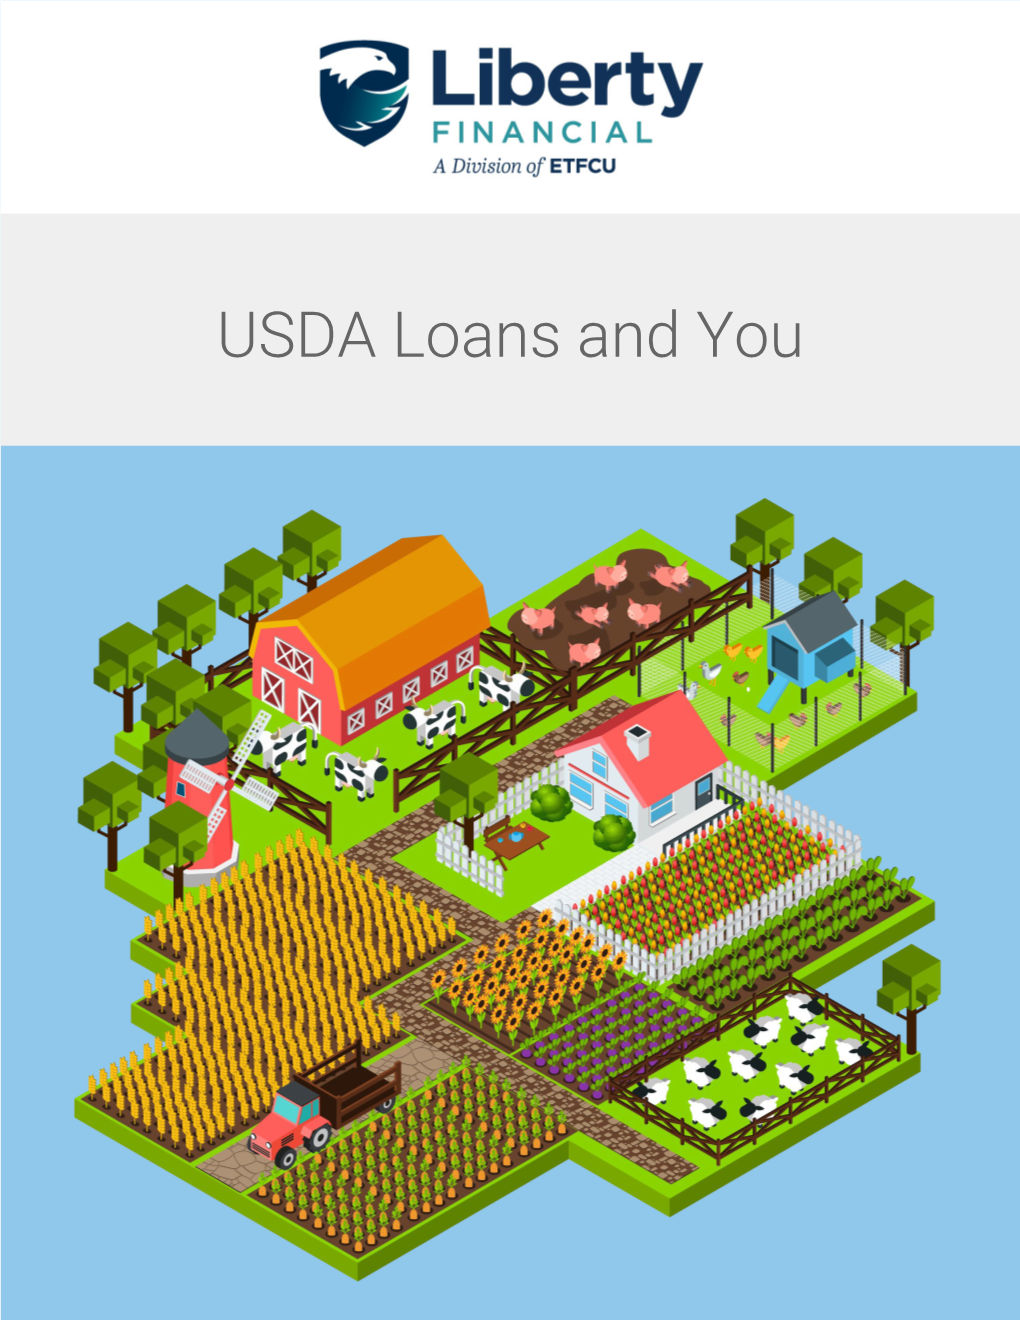 USDA Loans and You Contents